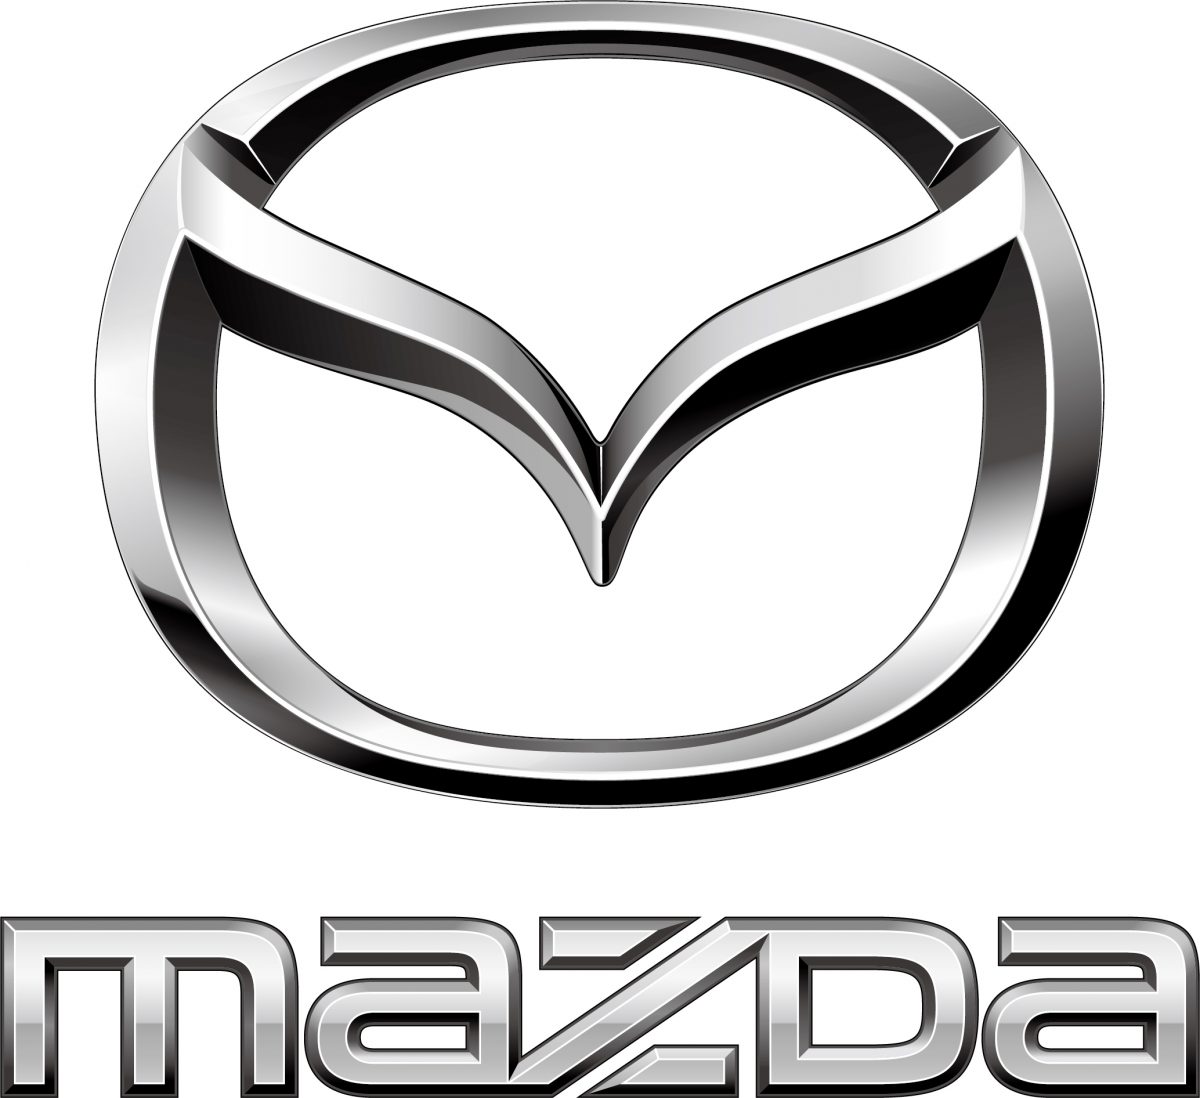 Mazda Reports February Sales Results